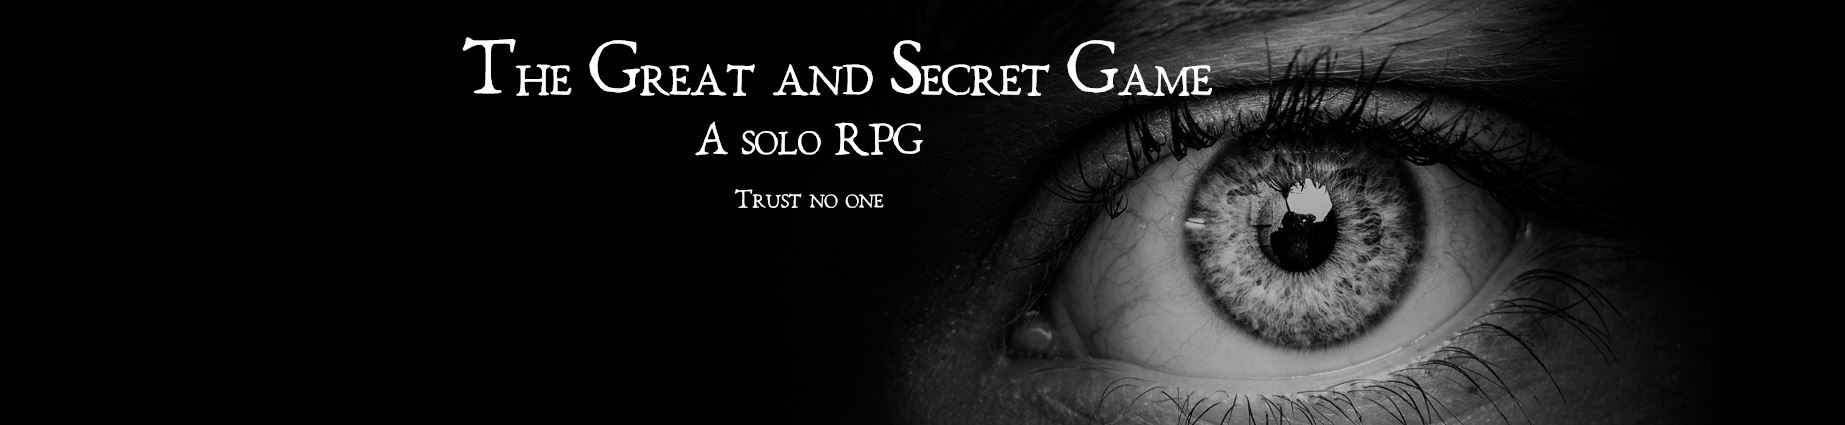 The Great and Secret Game - a solo RPG